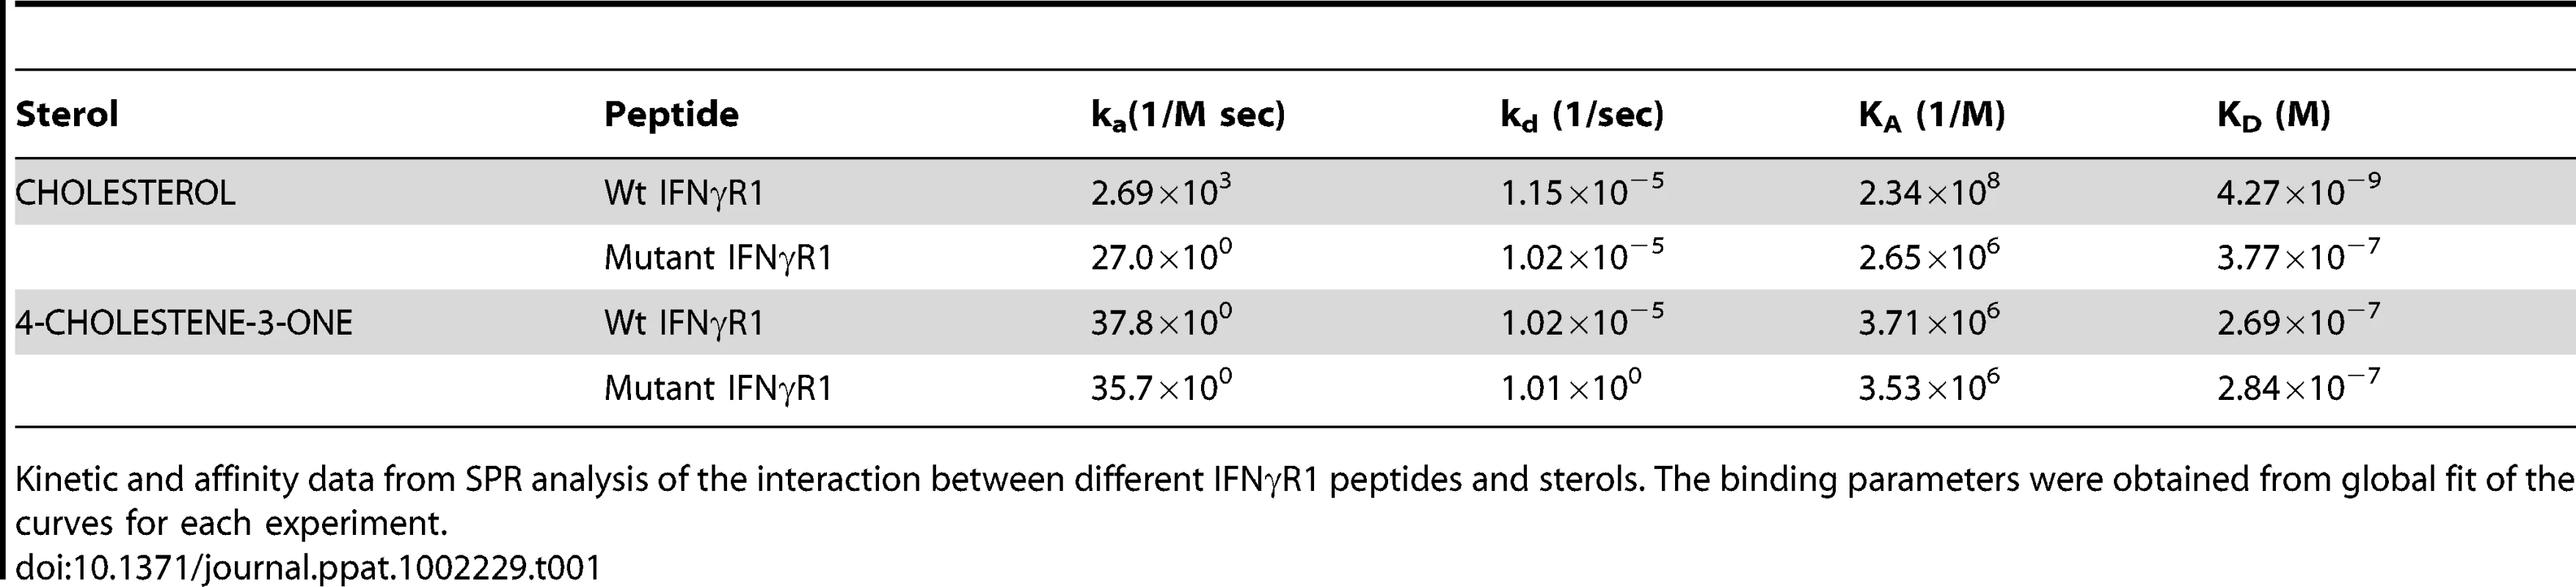 Summary of Binding parameters of IFNγR1 peptide-sterol interaction.